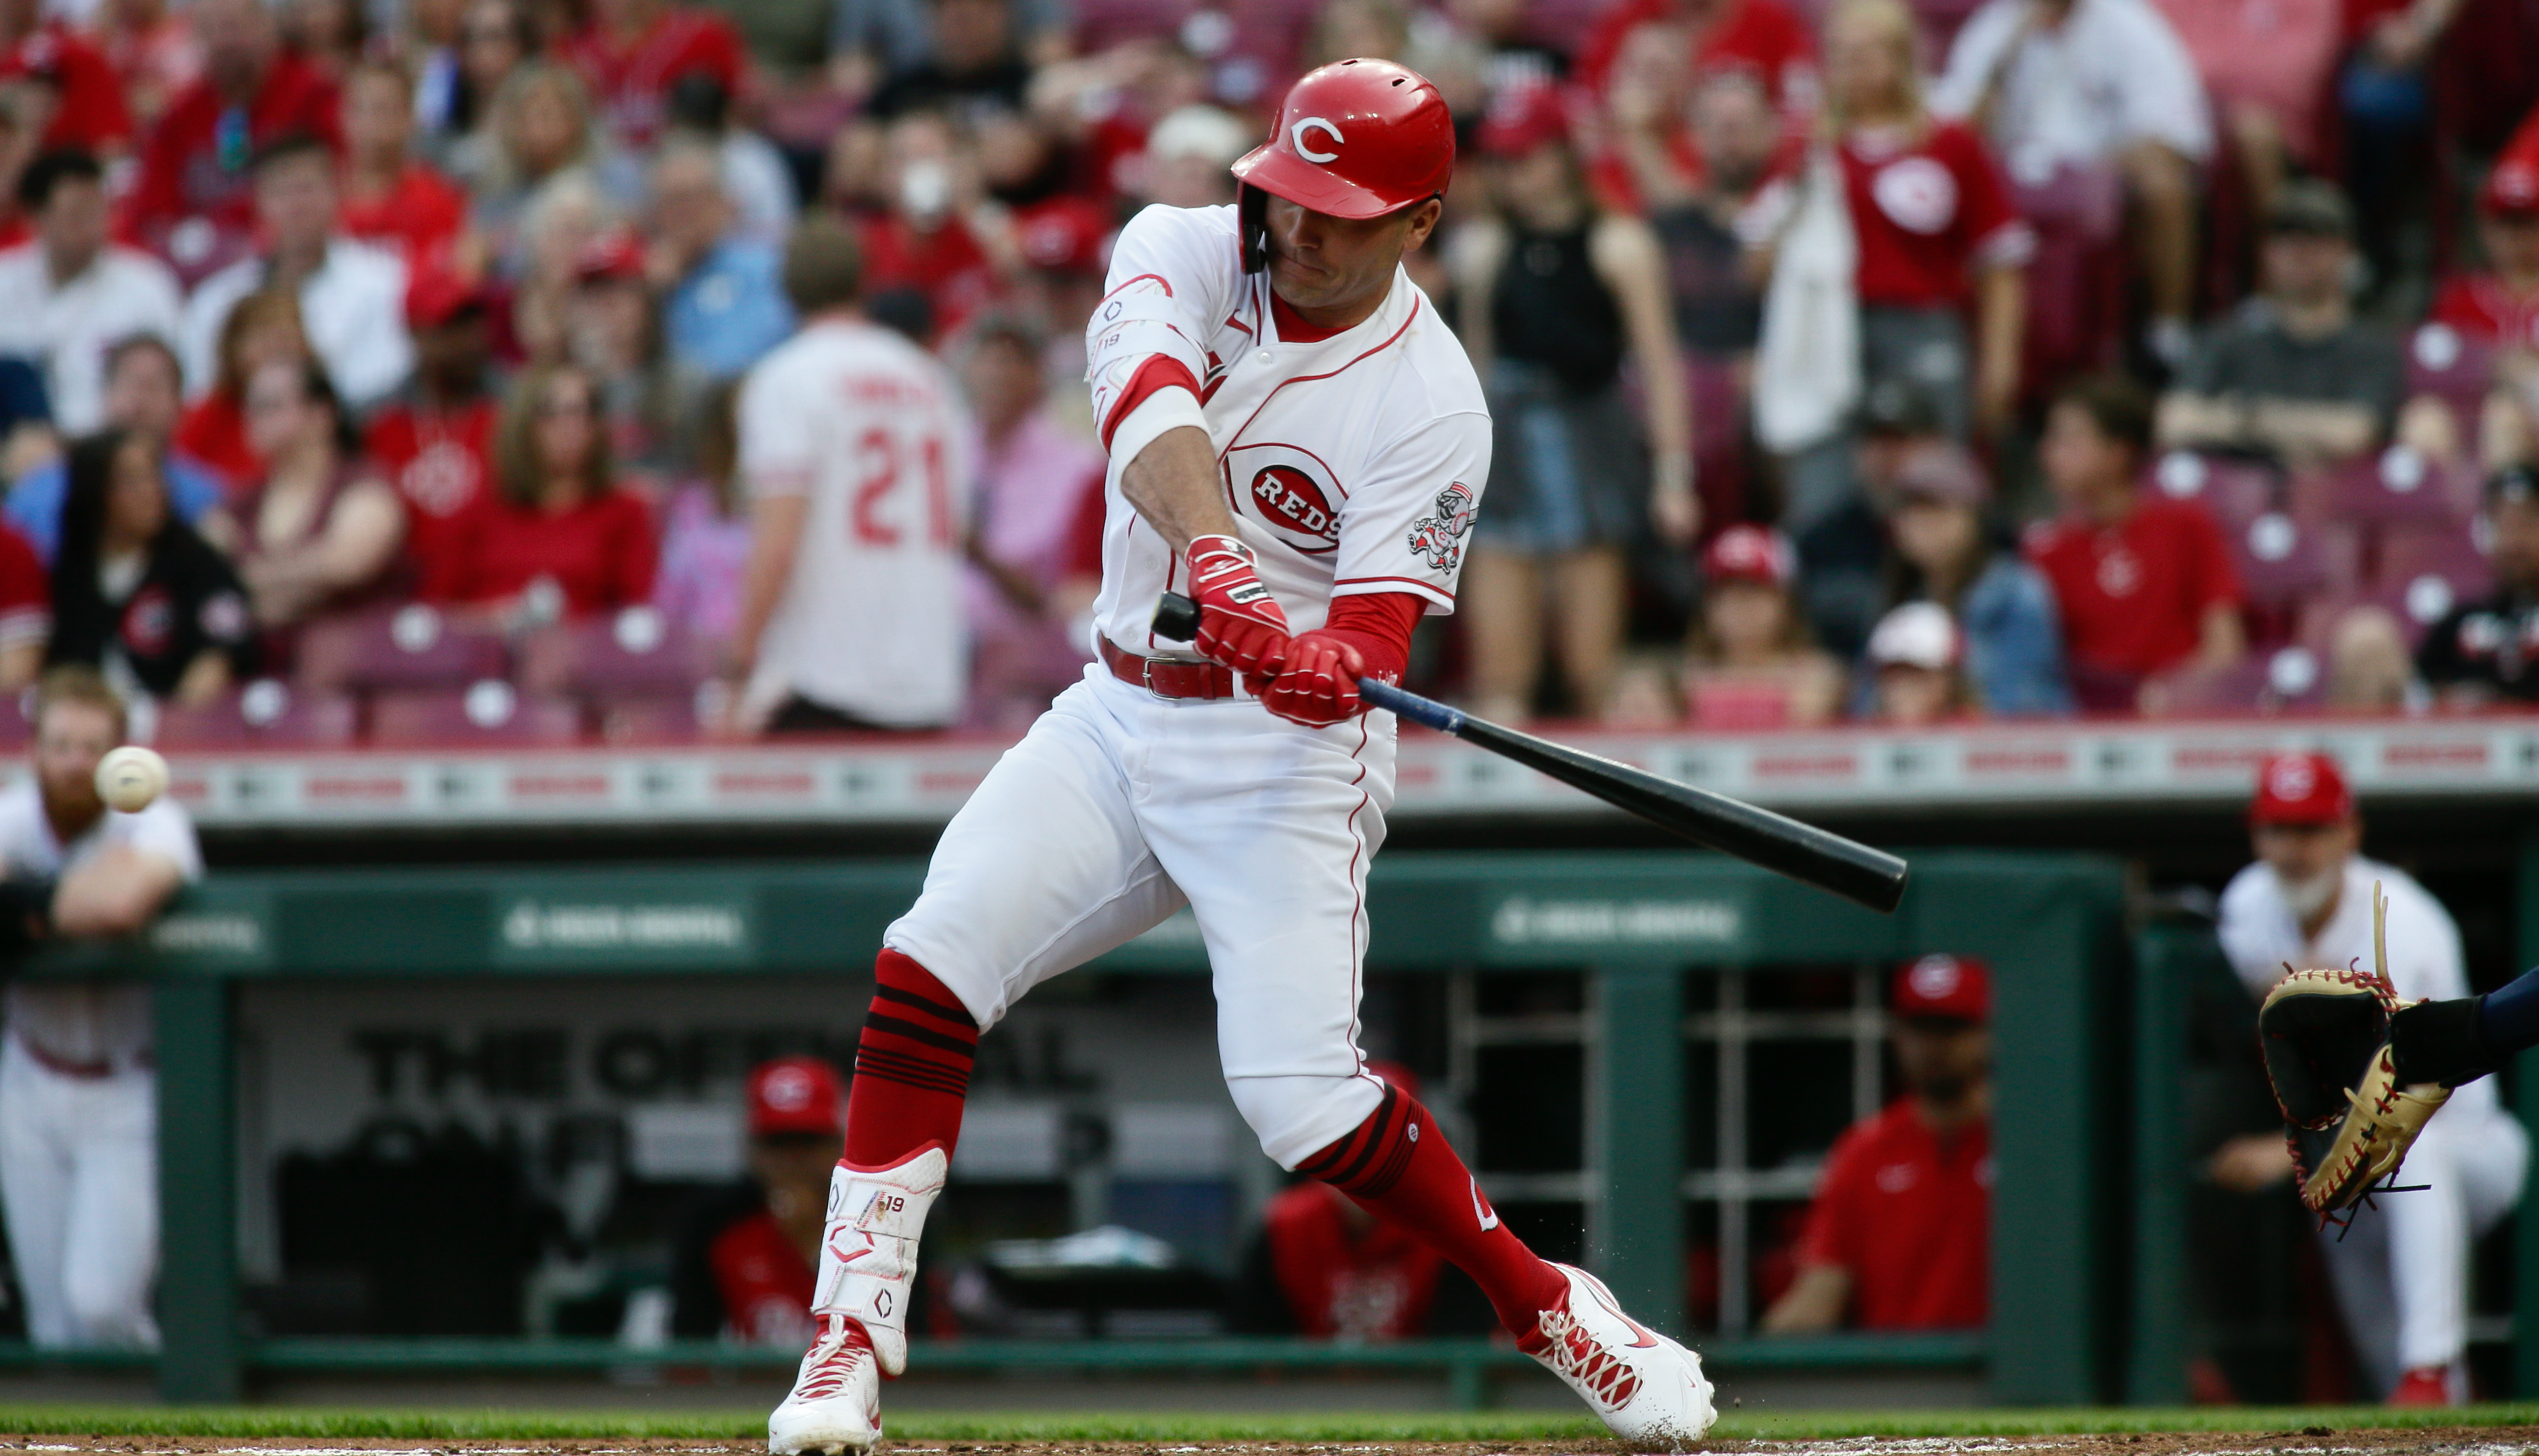 McCoy: Is Reds first baseman Joey Votto a Hall of Famer?